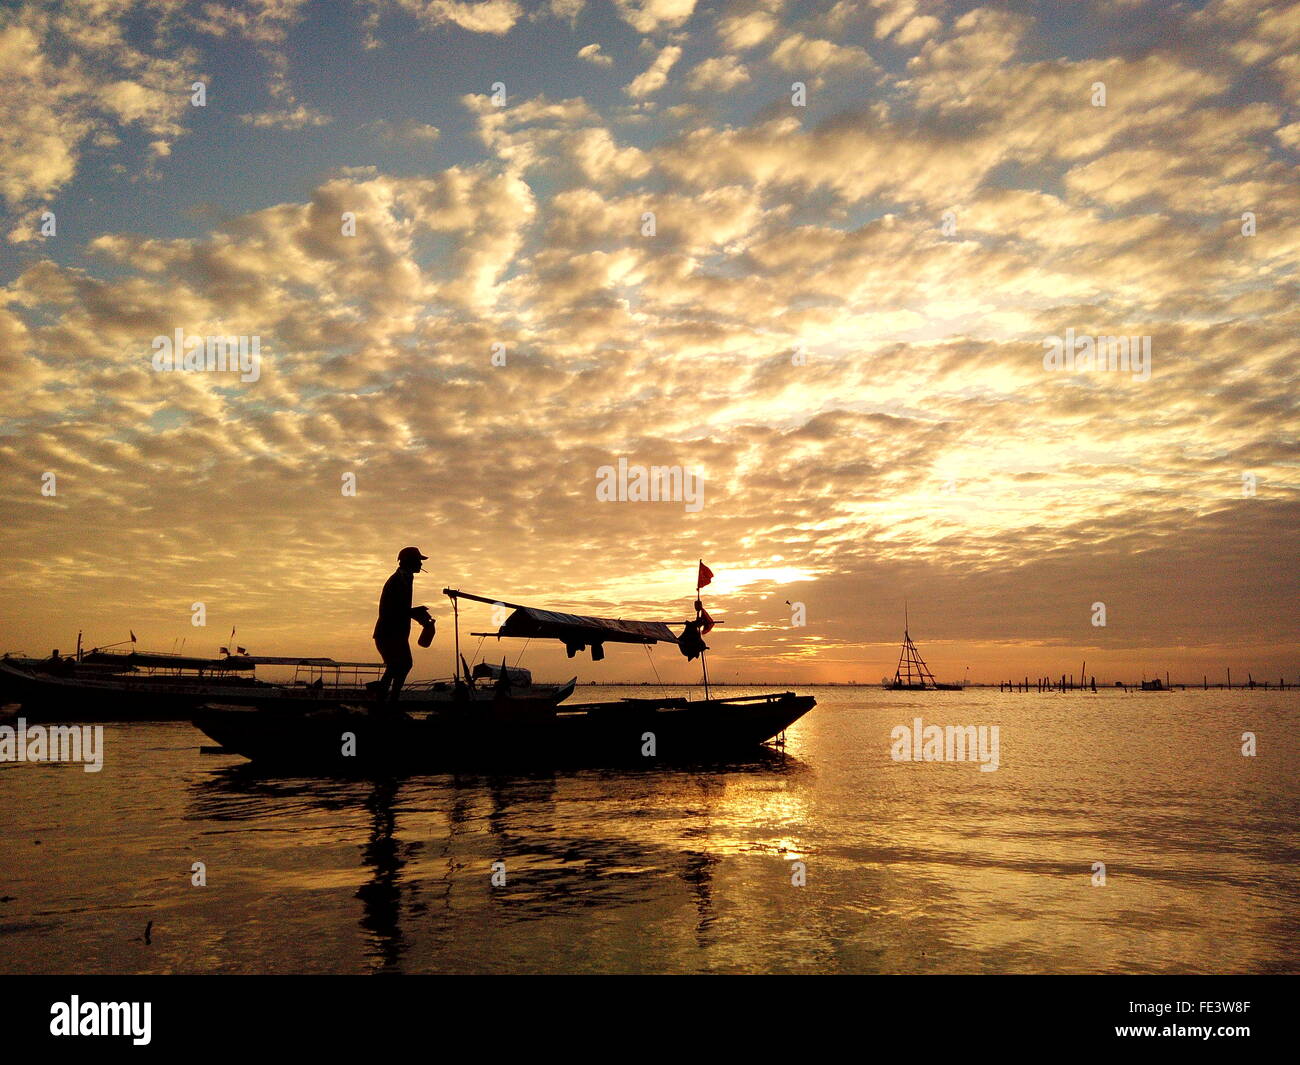 Silhouette Man On Boat Against Cloudy Sky During Sunset Stock Photo